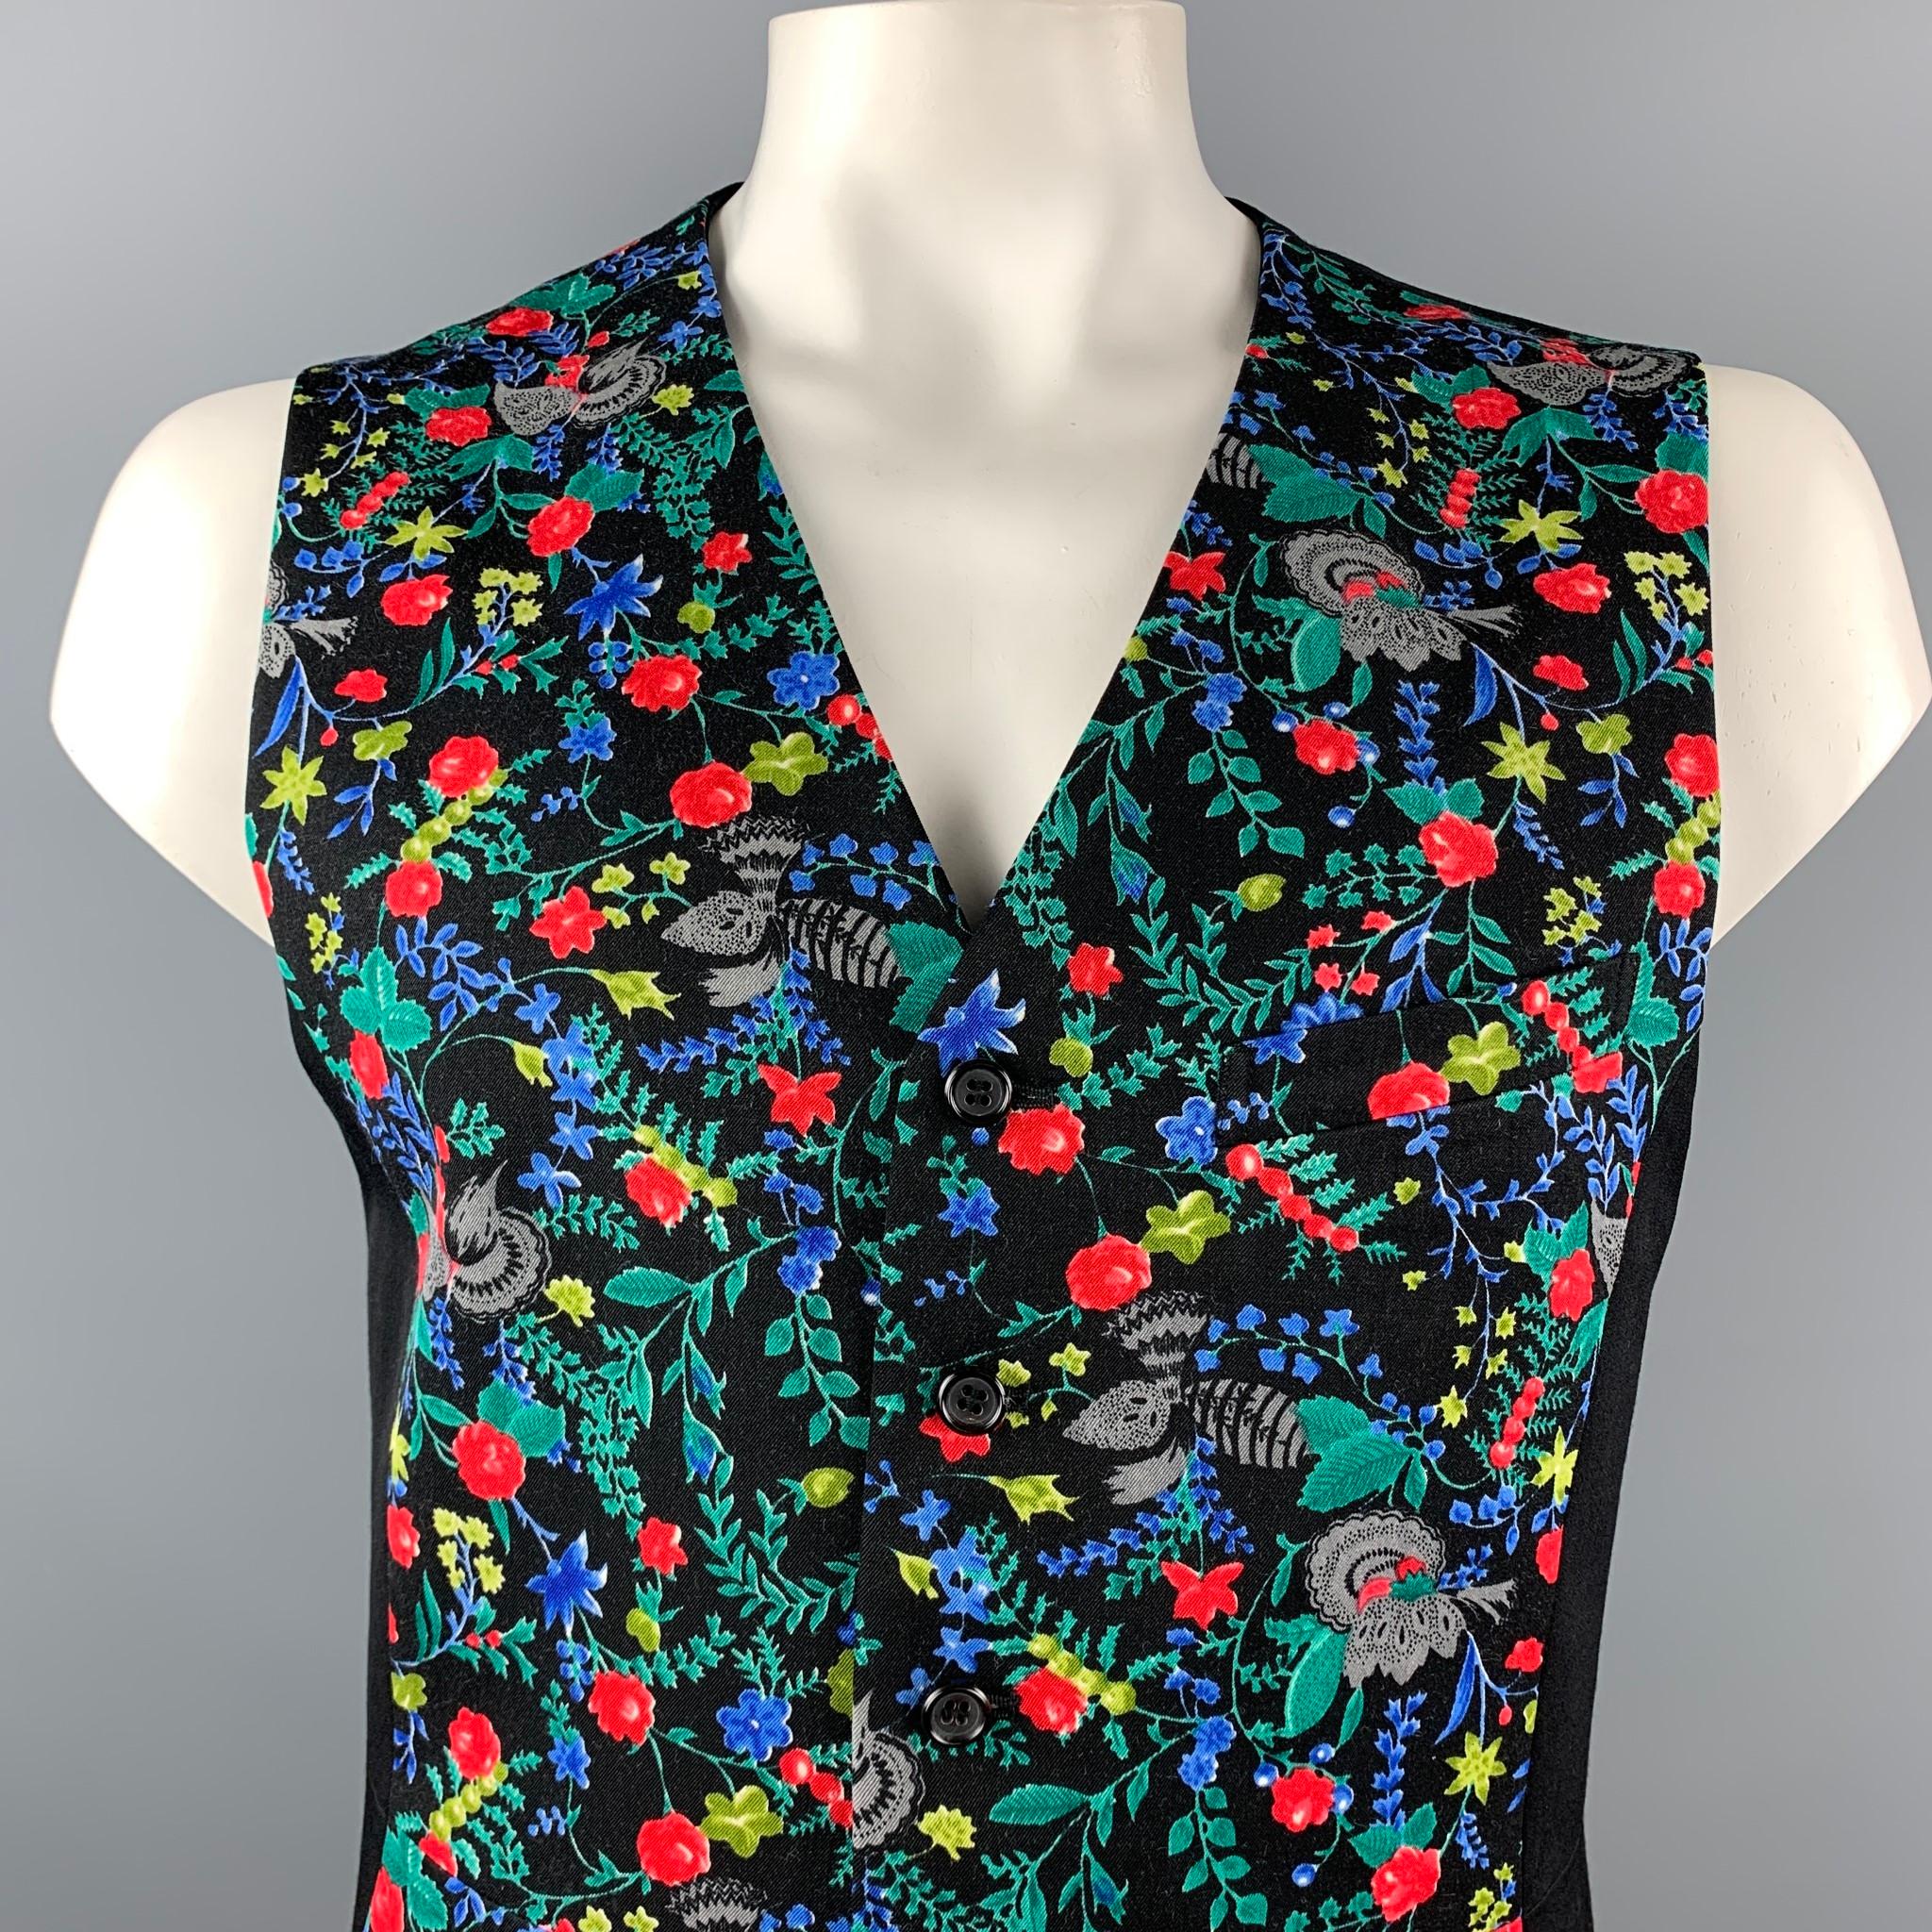 COMME des GARCONS HOMME PLUS vest comes in a multi-color floral print wool with a full liner featuring a mini slit pocket and a buttoned closure. Made in Japan.

Excellent Pre-Owned Condition.
Marked: L

Measurements:

Shoulder: 16 in. 
Chest: 40